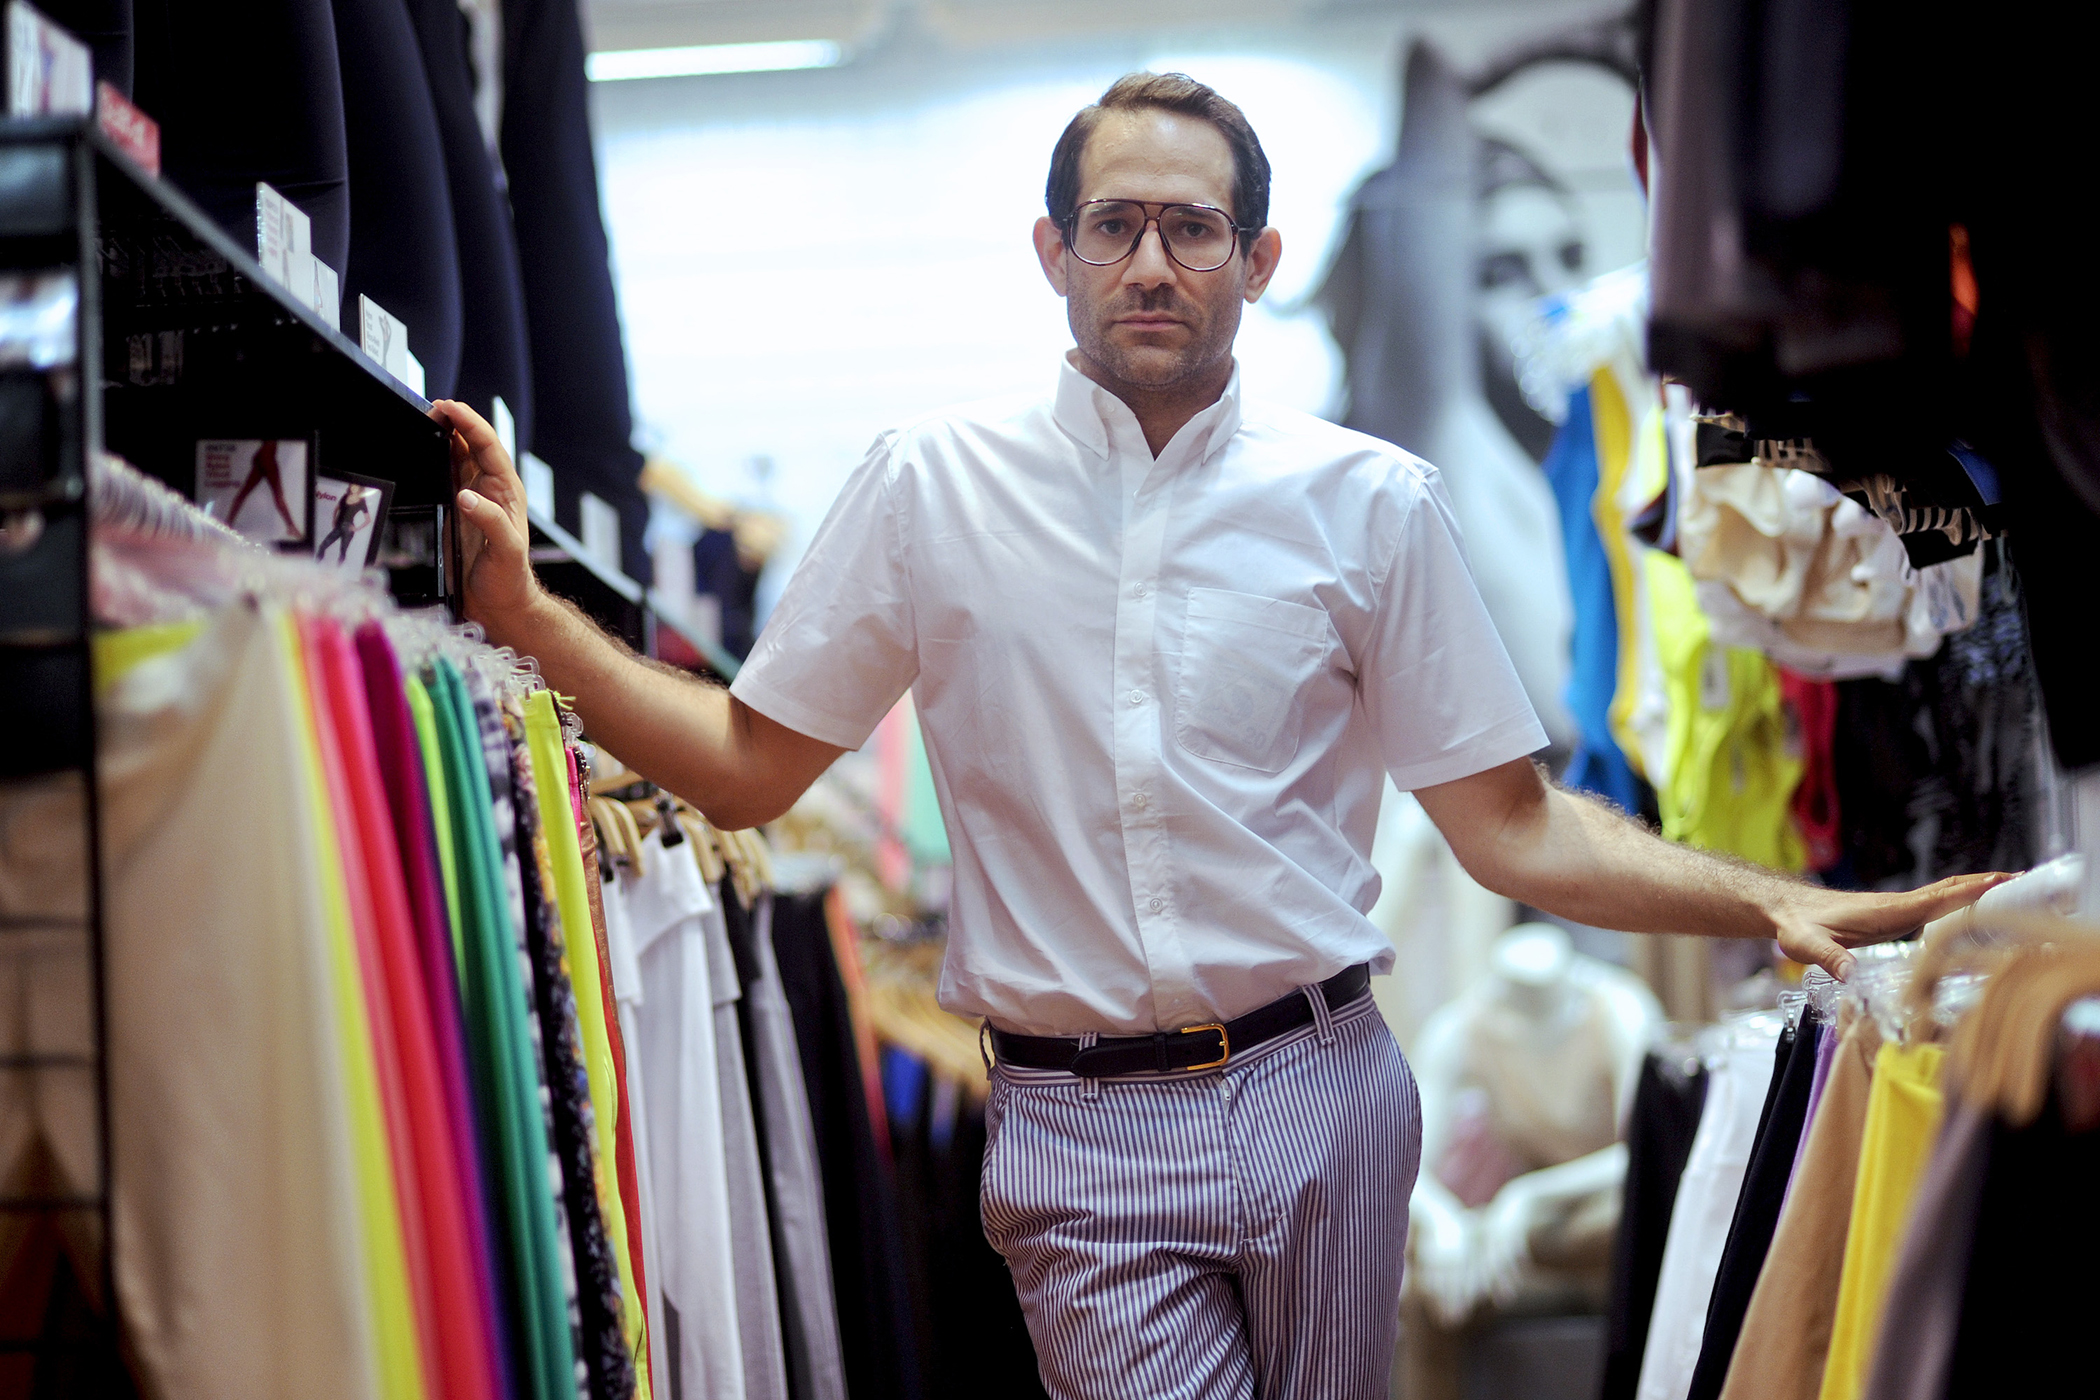 Dov Charney, chairman and chief executive officer of American Apparel Inc., stands for a portrait in a company retail store in New York, U.S., on Thursday, July 29, 2010. Starting the company in a dorm at Tufts University in Medford, Massachusetts, Charney built a worldwide empire of 280 clothing stores by leaping out ahead of mainstream fashion. He personified the racy, risk-taking aesthetics of his business and is now facing the consequences - skittish lenders and investors who doubt his ability to oversee his own creation.